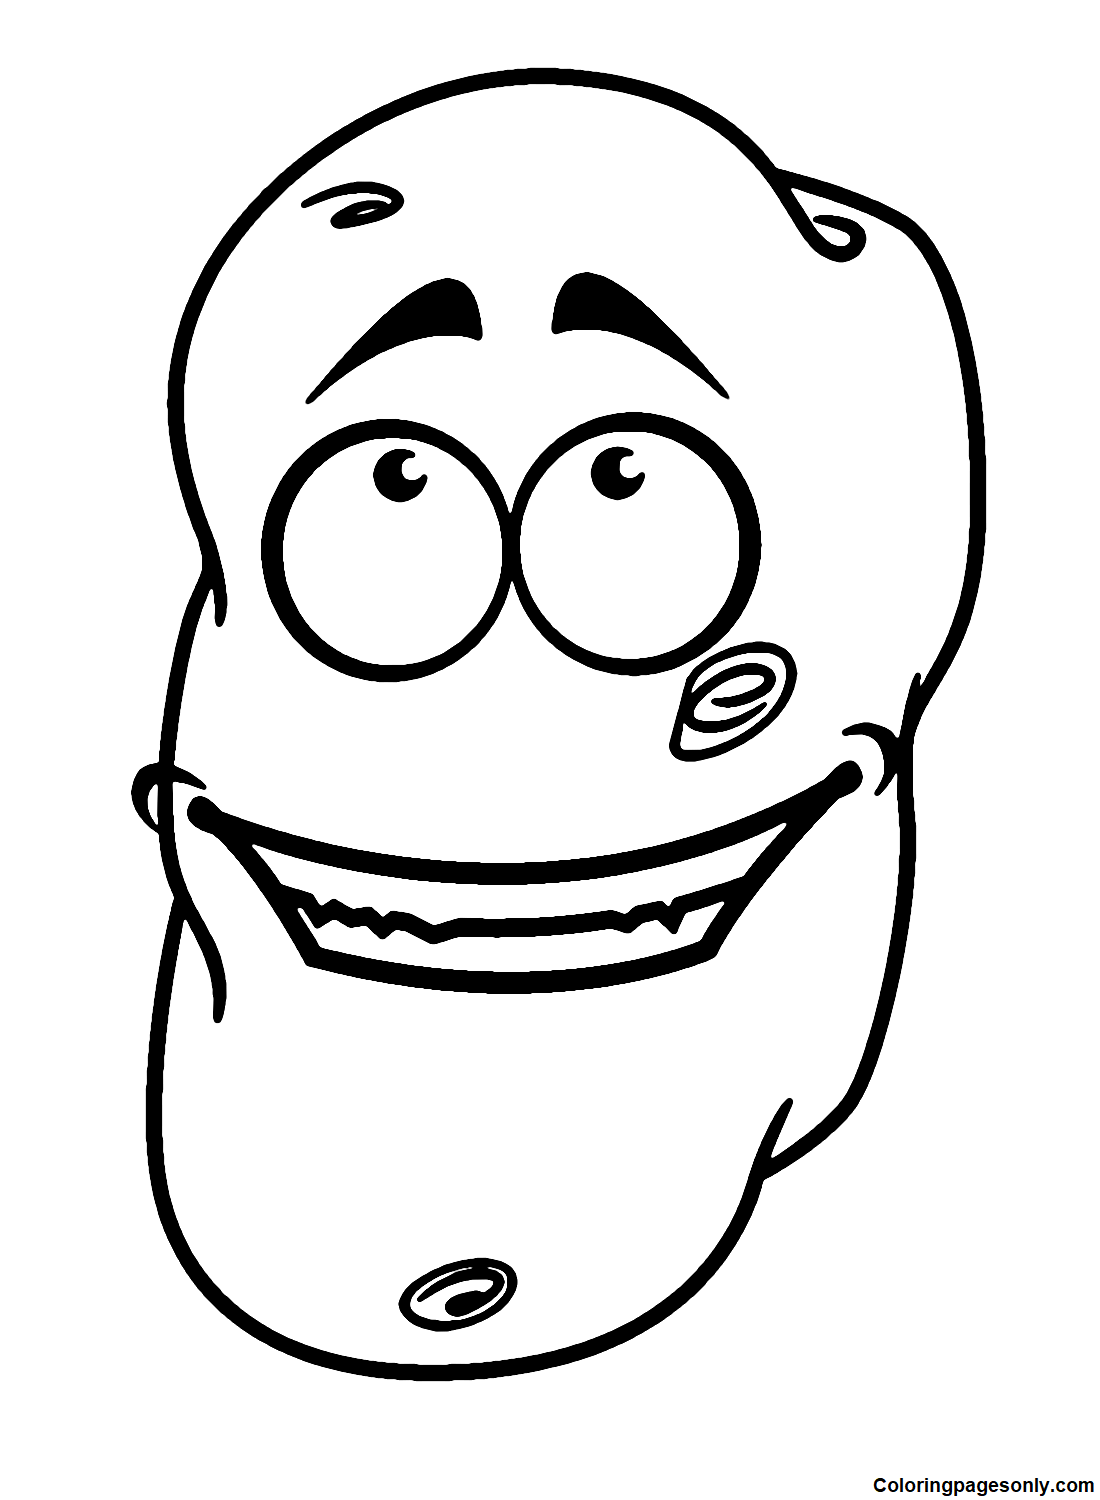 Pictures Potato Cartoon Coloring Page